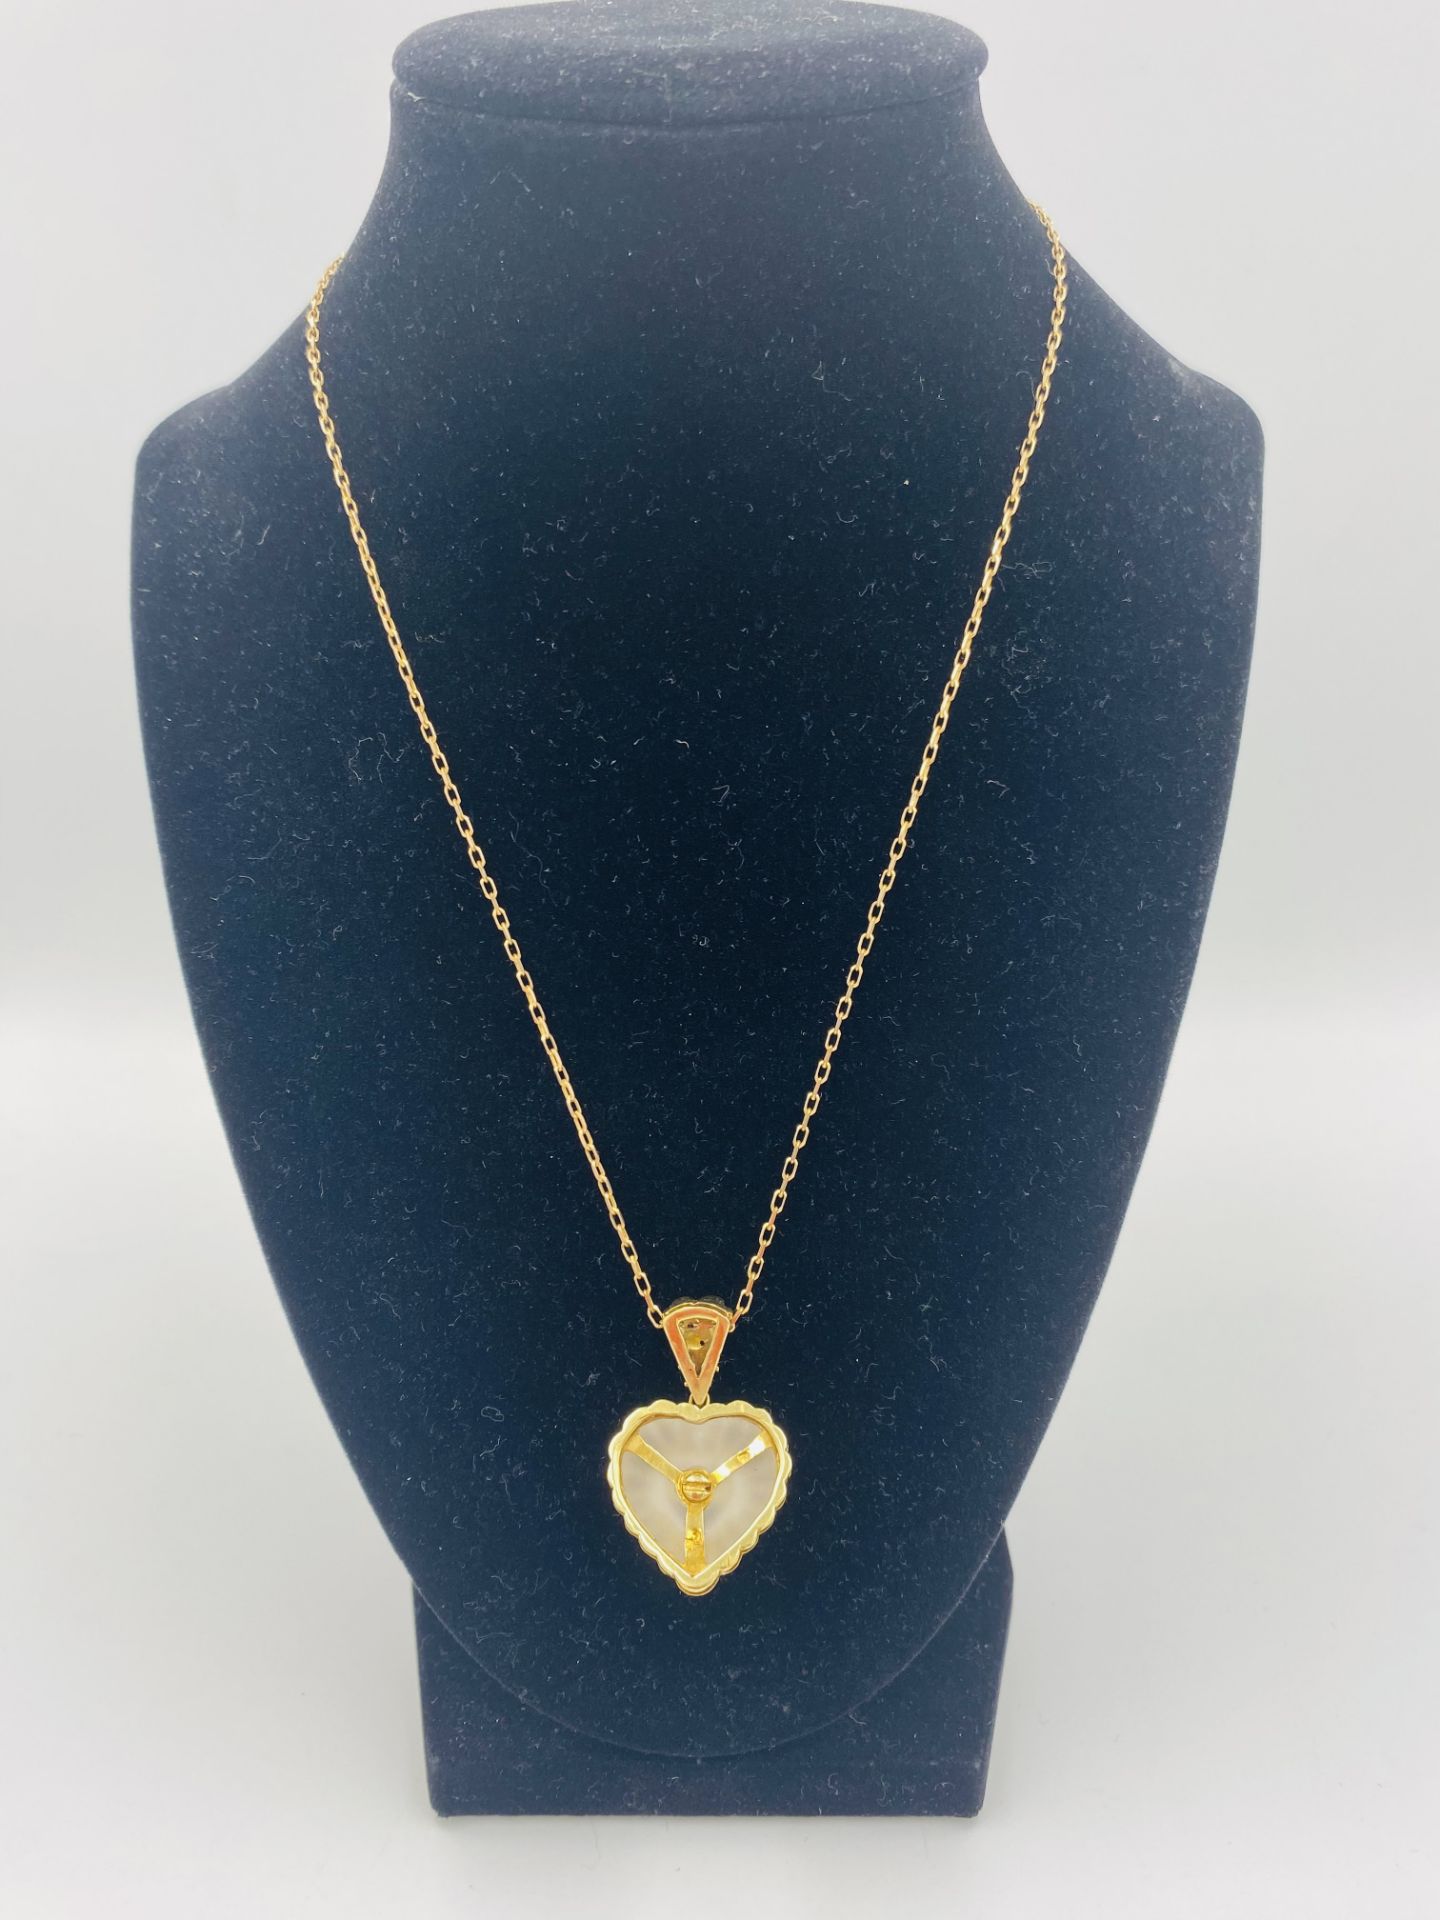 Rock crystal heart shaped pendant with 18ct gold mount - Image 3 of 6